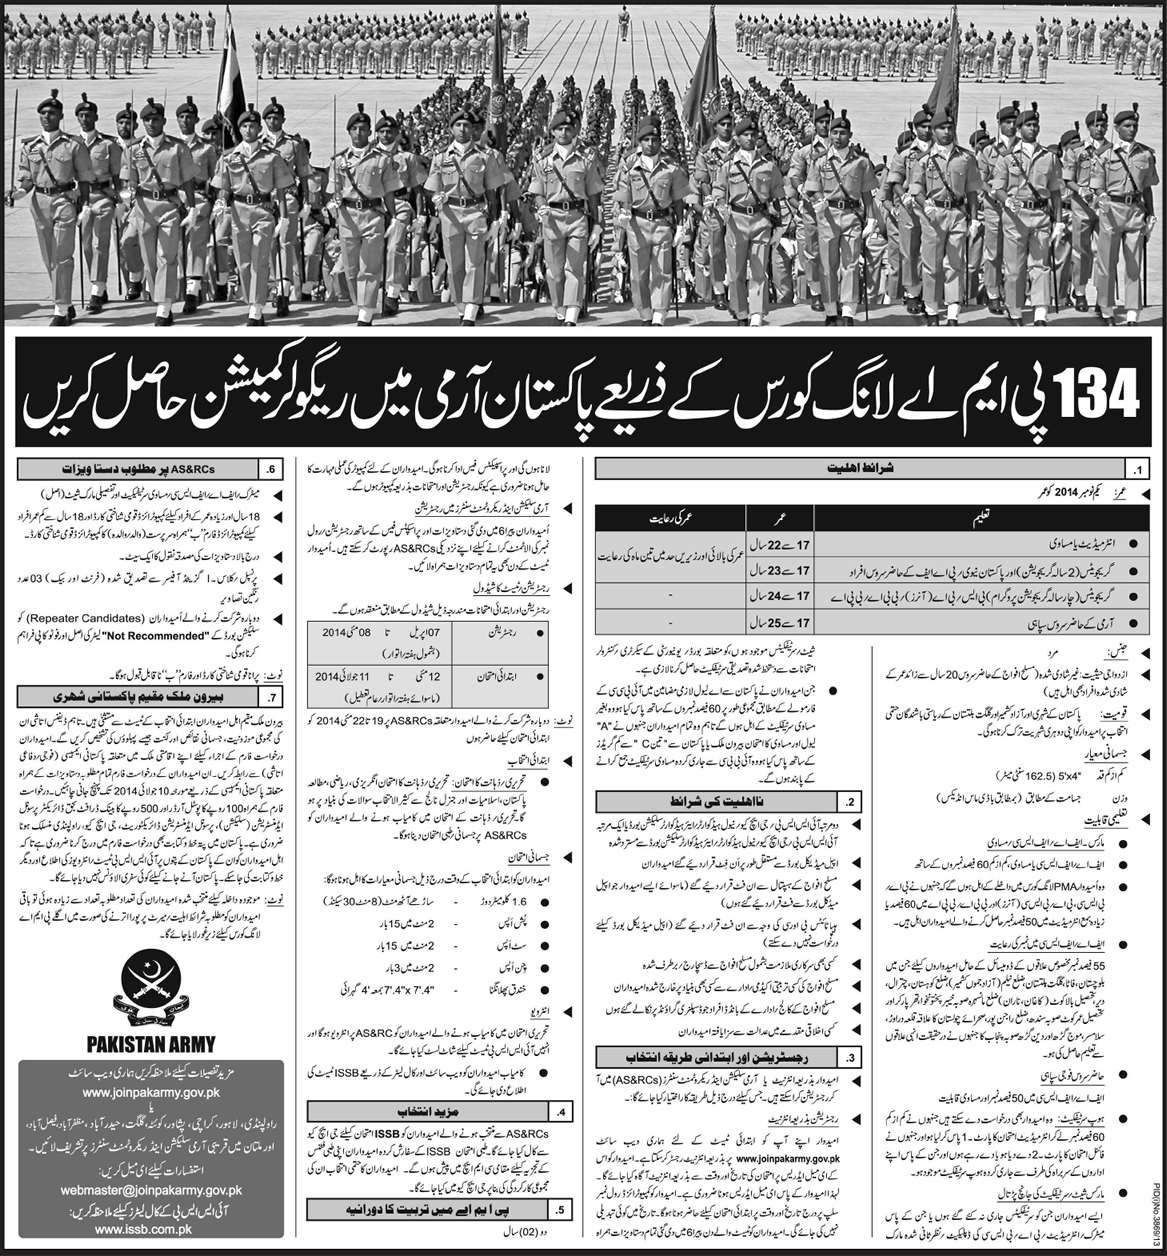 Join Pak Army 2014 April through Regular Commission in 134 PMA Long Course